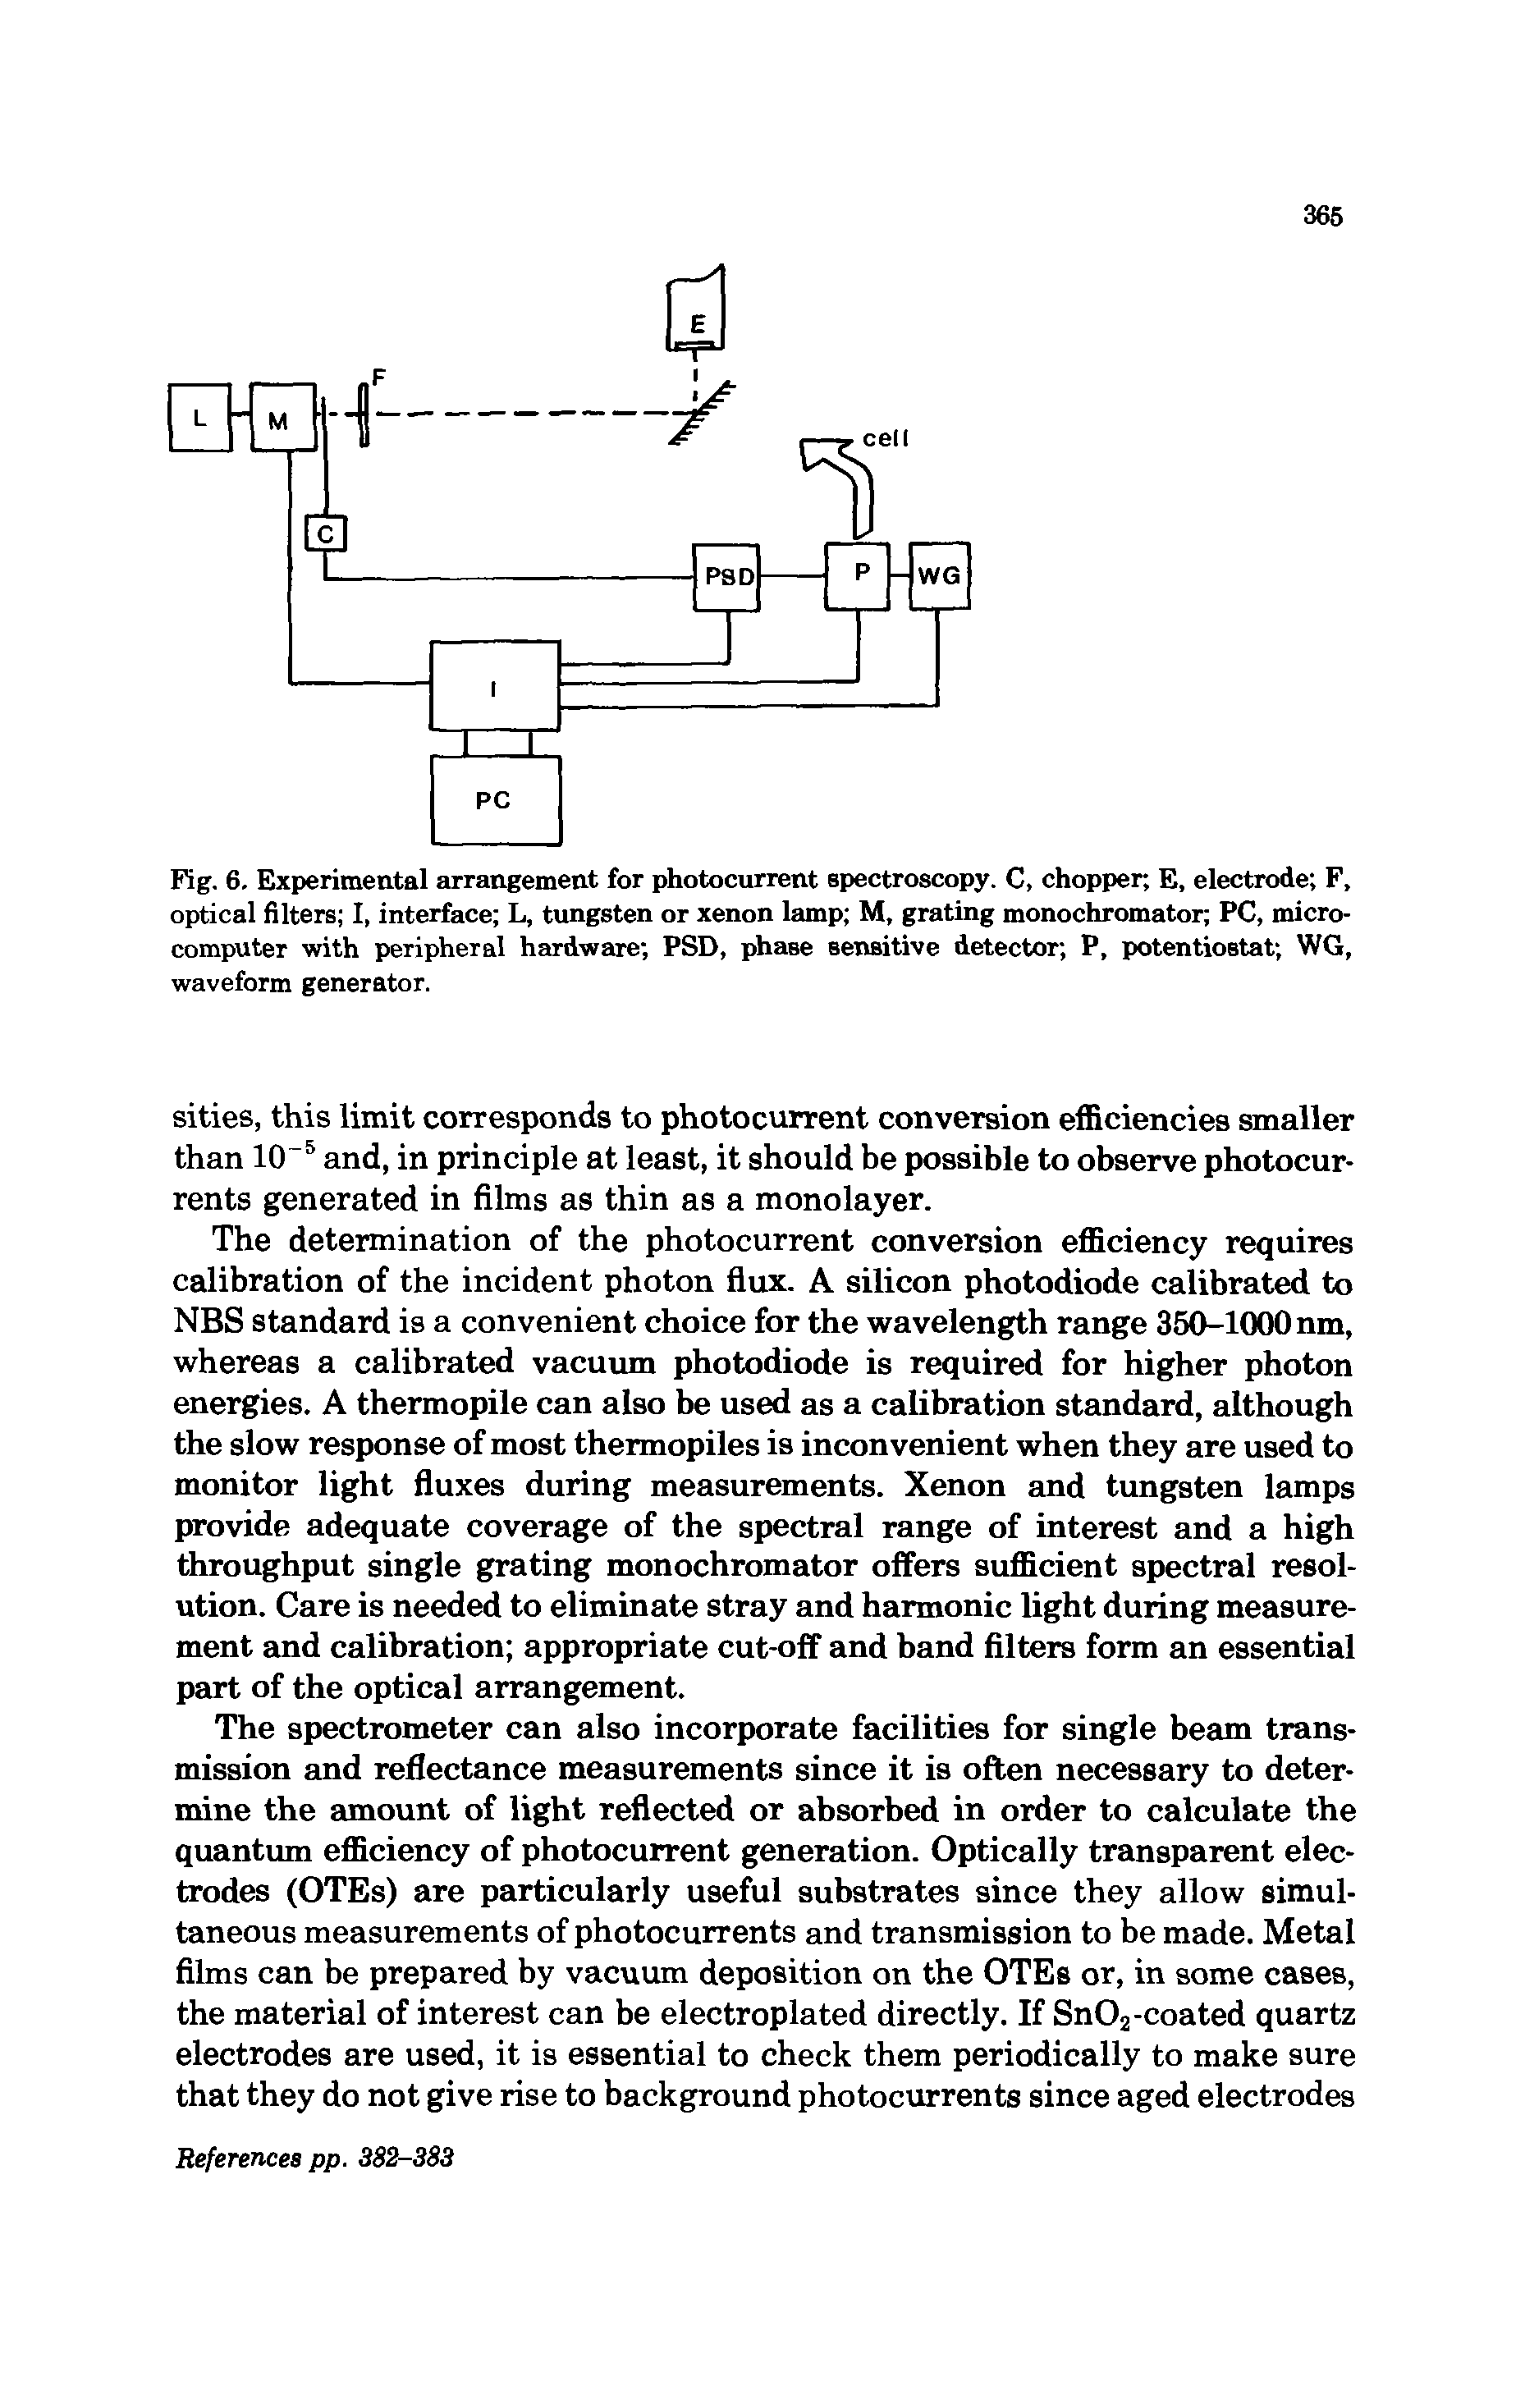 Fig. 6. Experimental arrangement for photocurrent spectroscopy. C, chopper E, electrode F, optical filters I, interface L, tungsten or xenon lamp M, grating monochromator PC, microcomputer with peripheral hardware PSD, phase sensitive detector P, potentiostat WG, waveform generator.